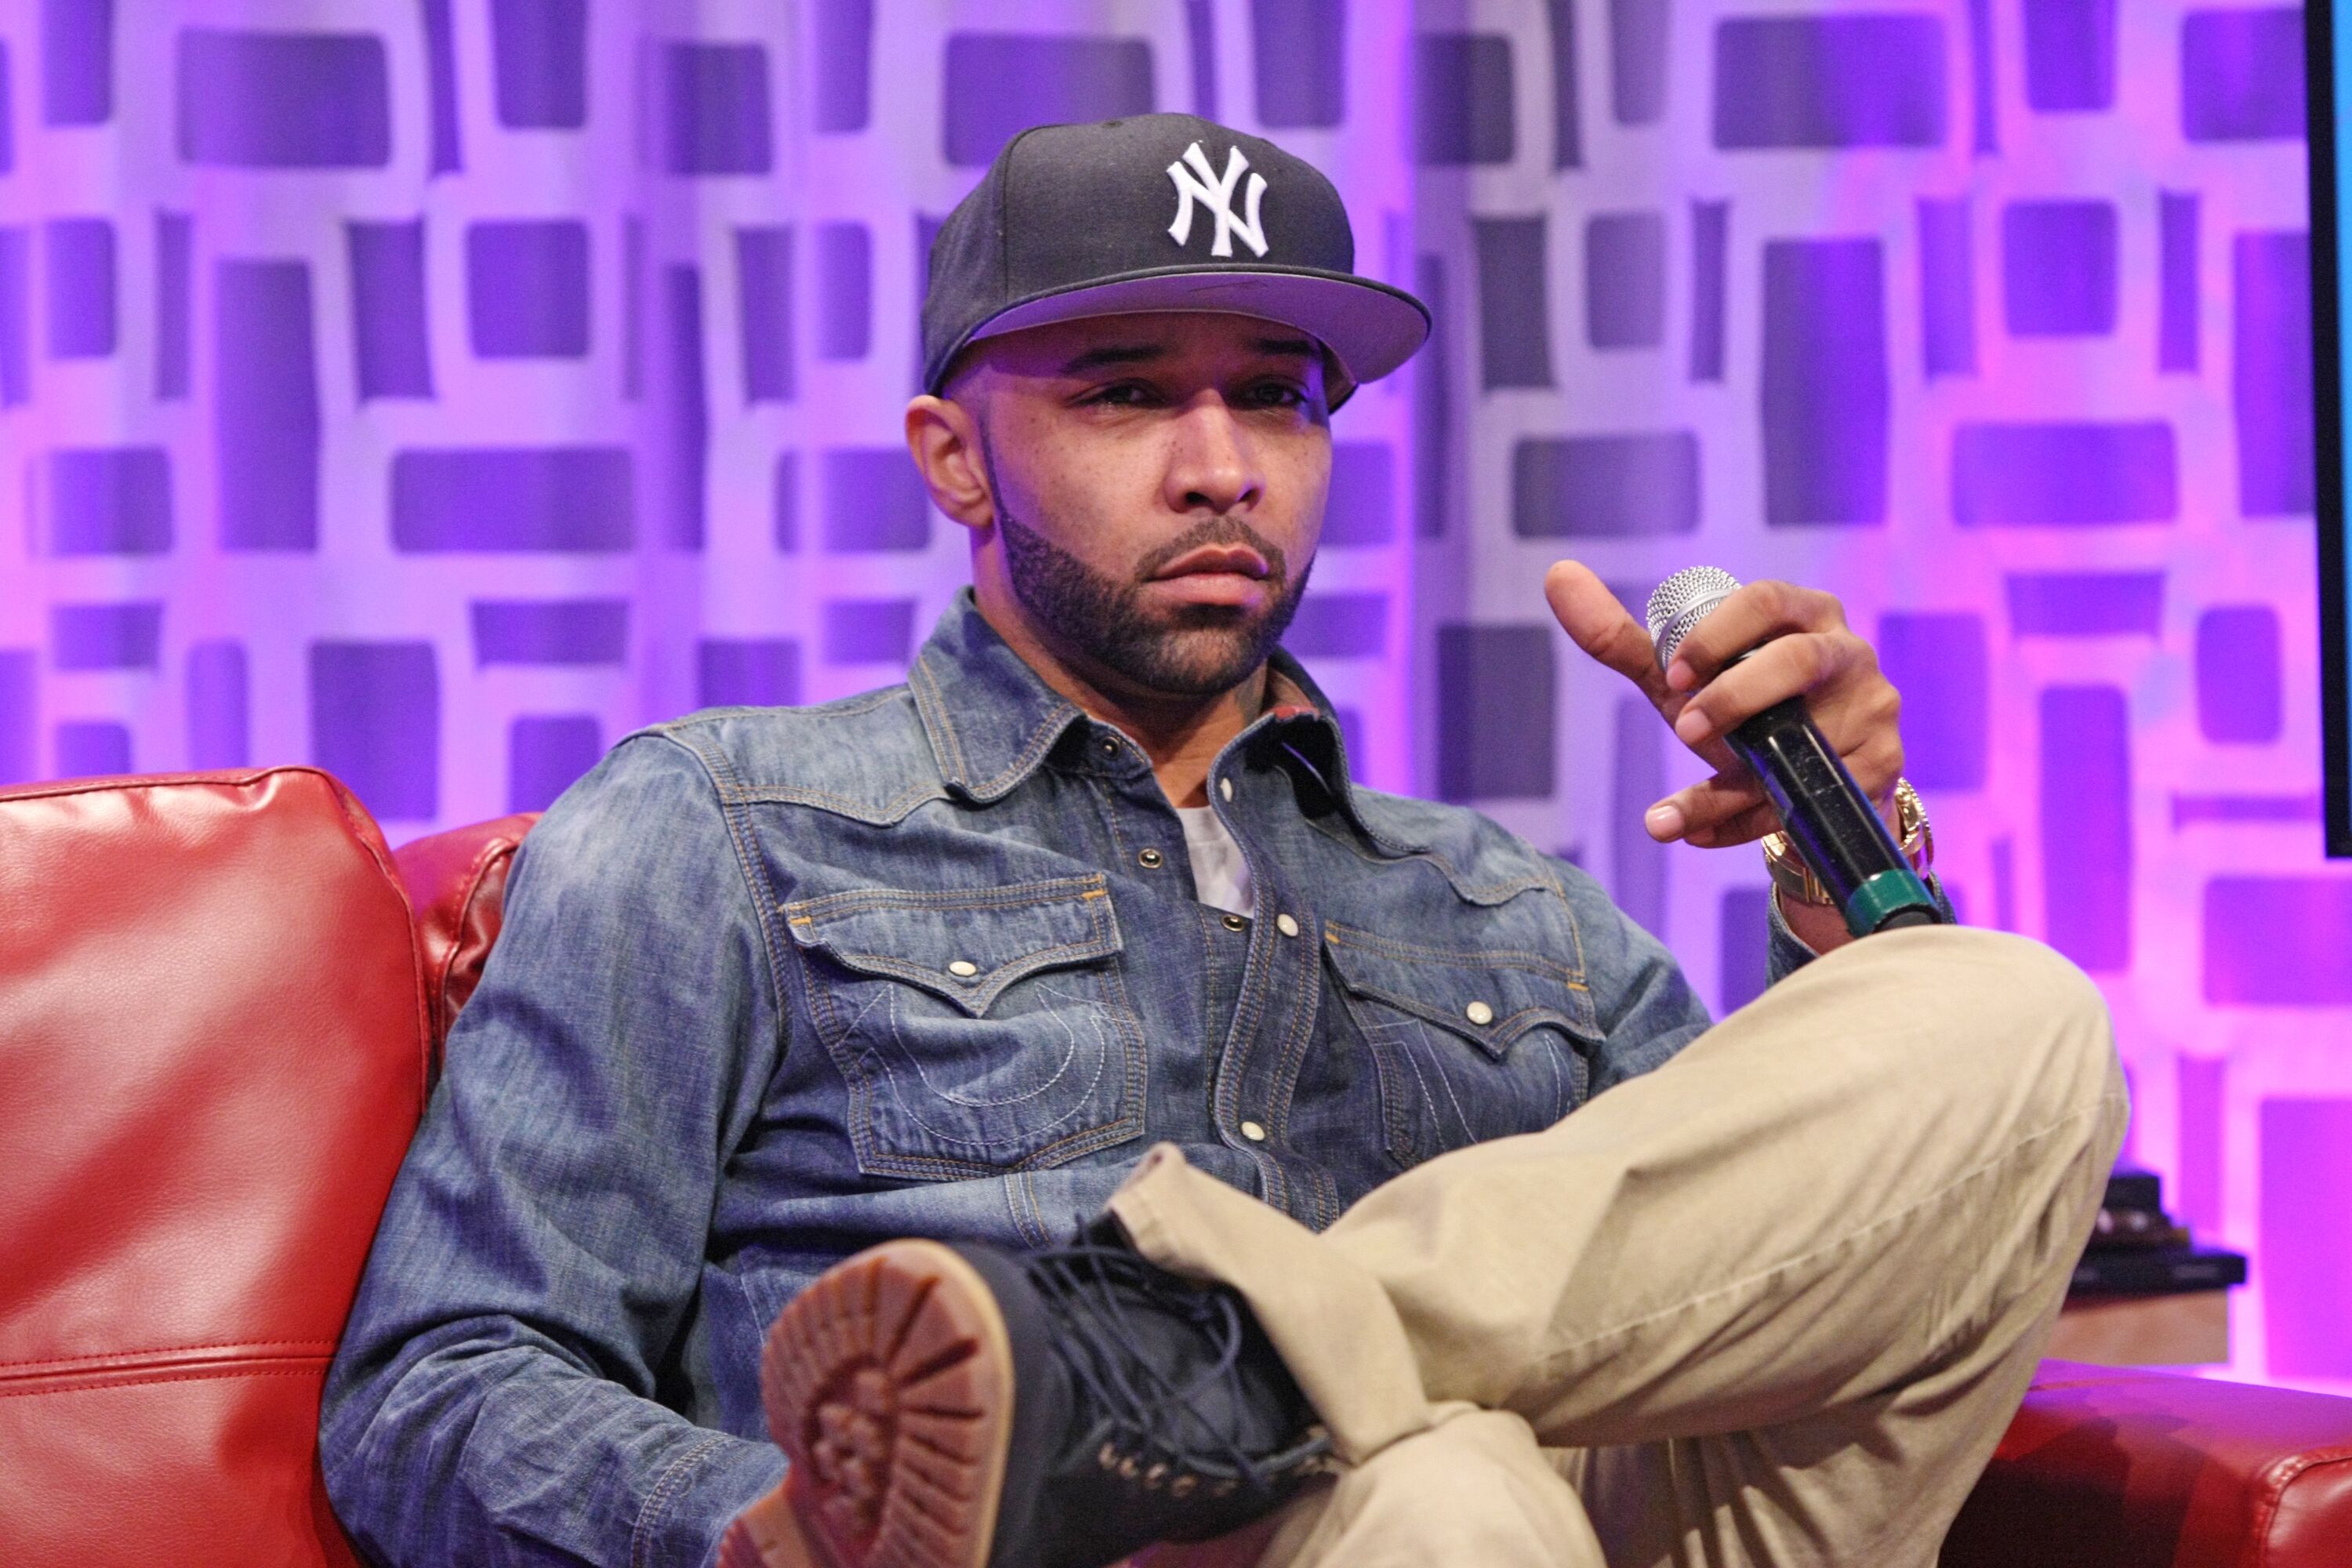 Joe Budden at one of his speaking engagements | Source: Getty Images/GlobalImagesUkraine